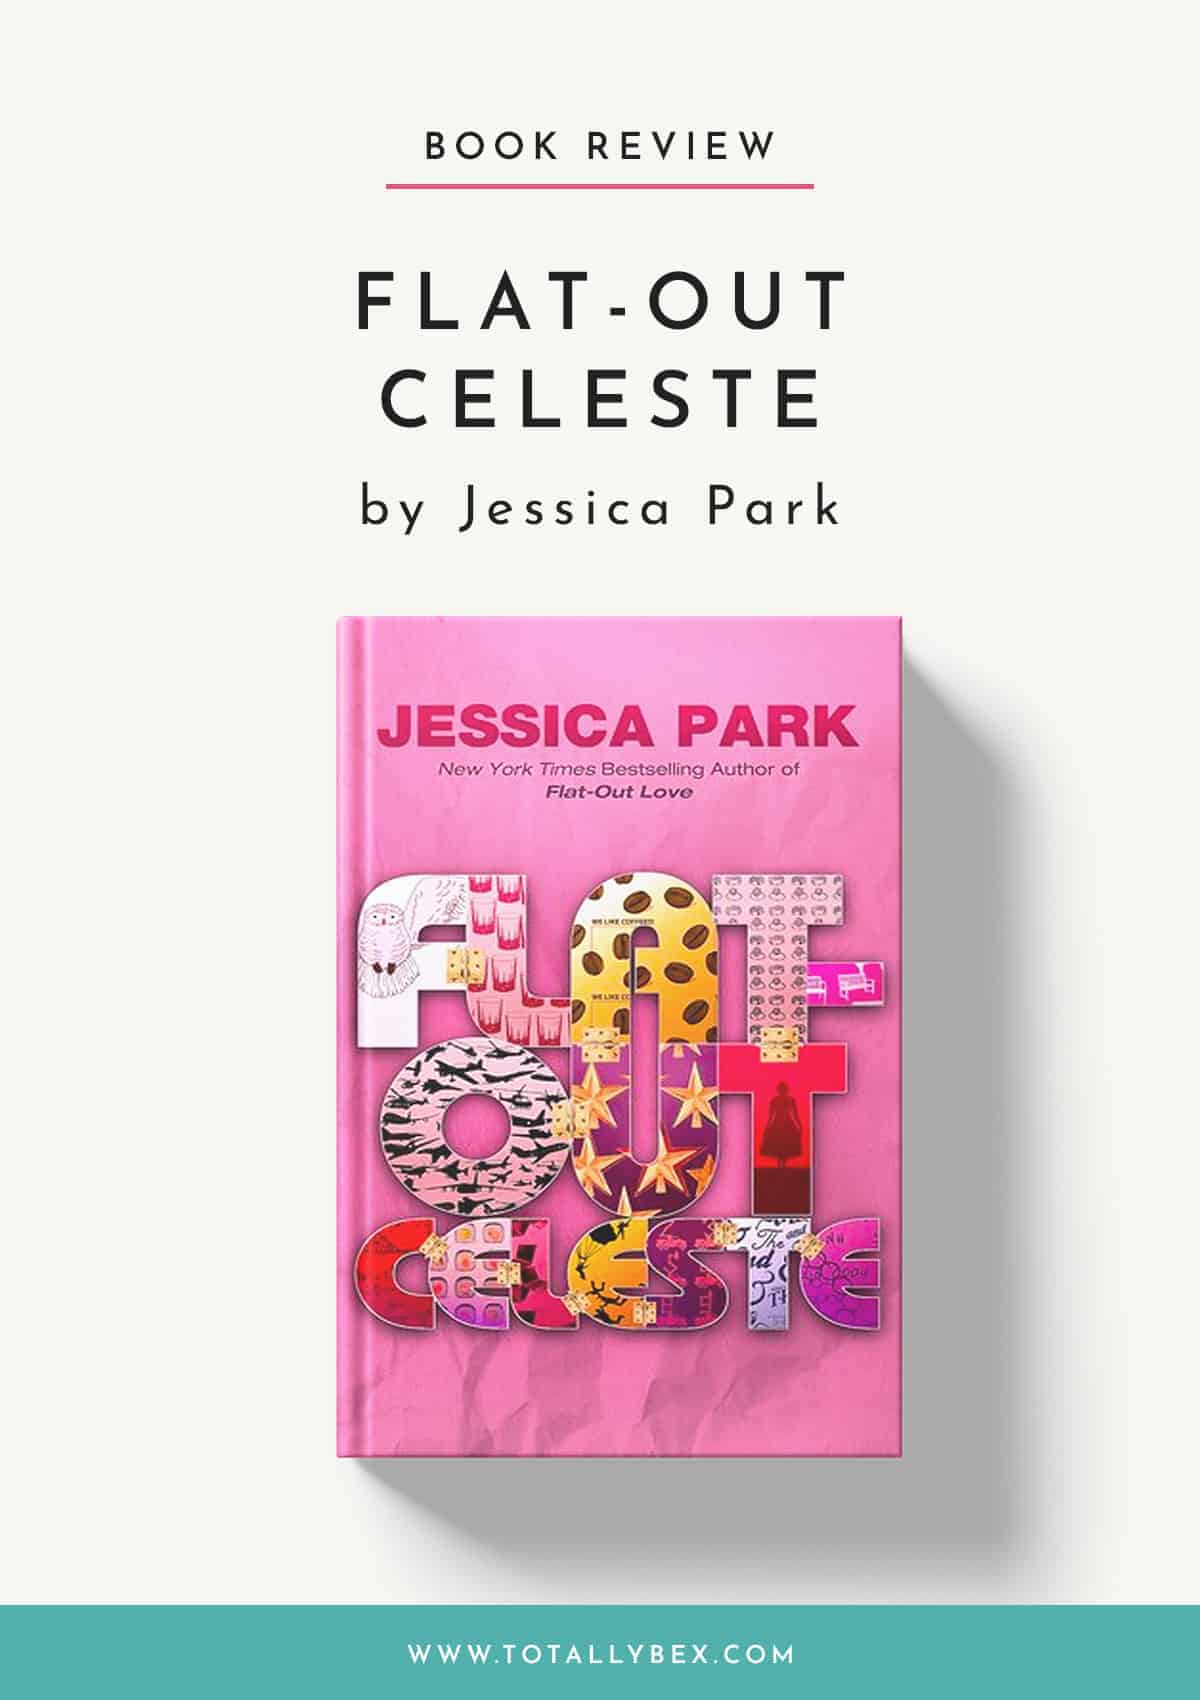 Flat-Out Celeste by Jessica Park-Book Review